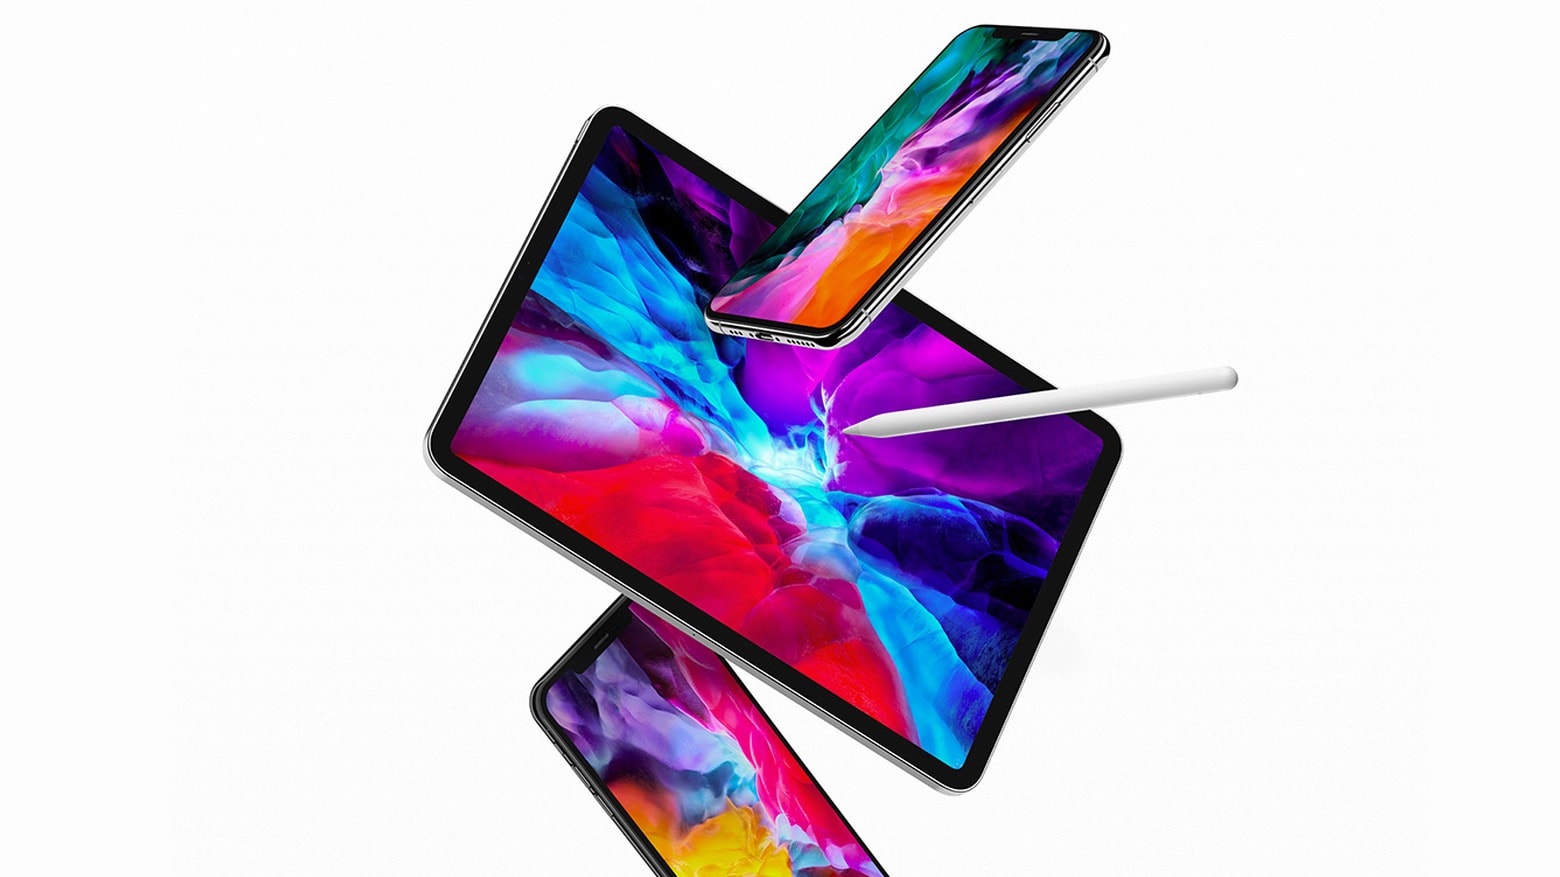 Grab the beautiful 2020 iPad Pro wallpapers now Cult of Mac